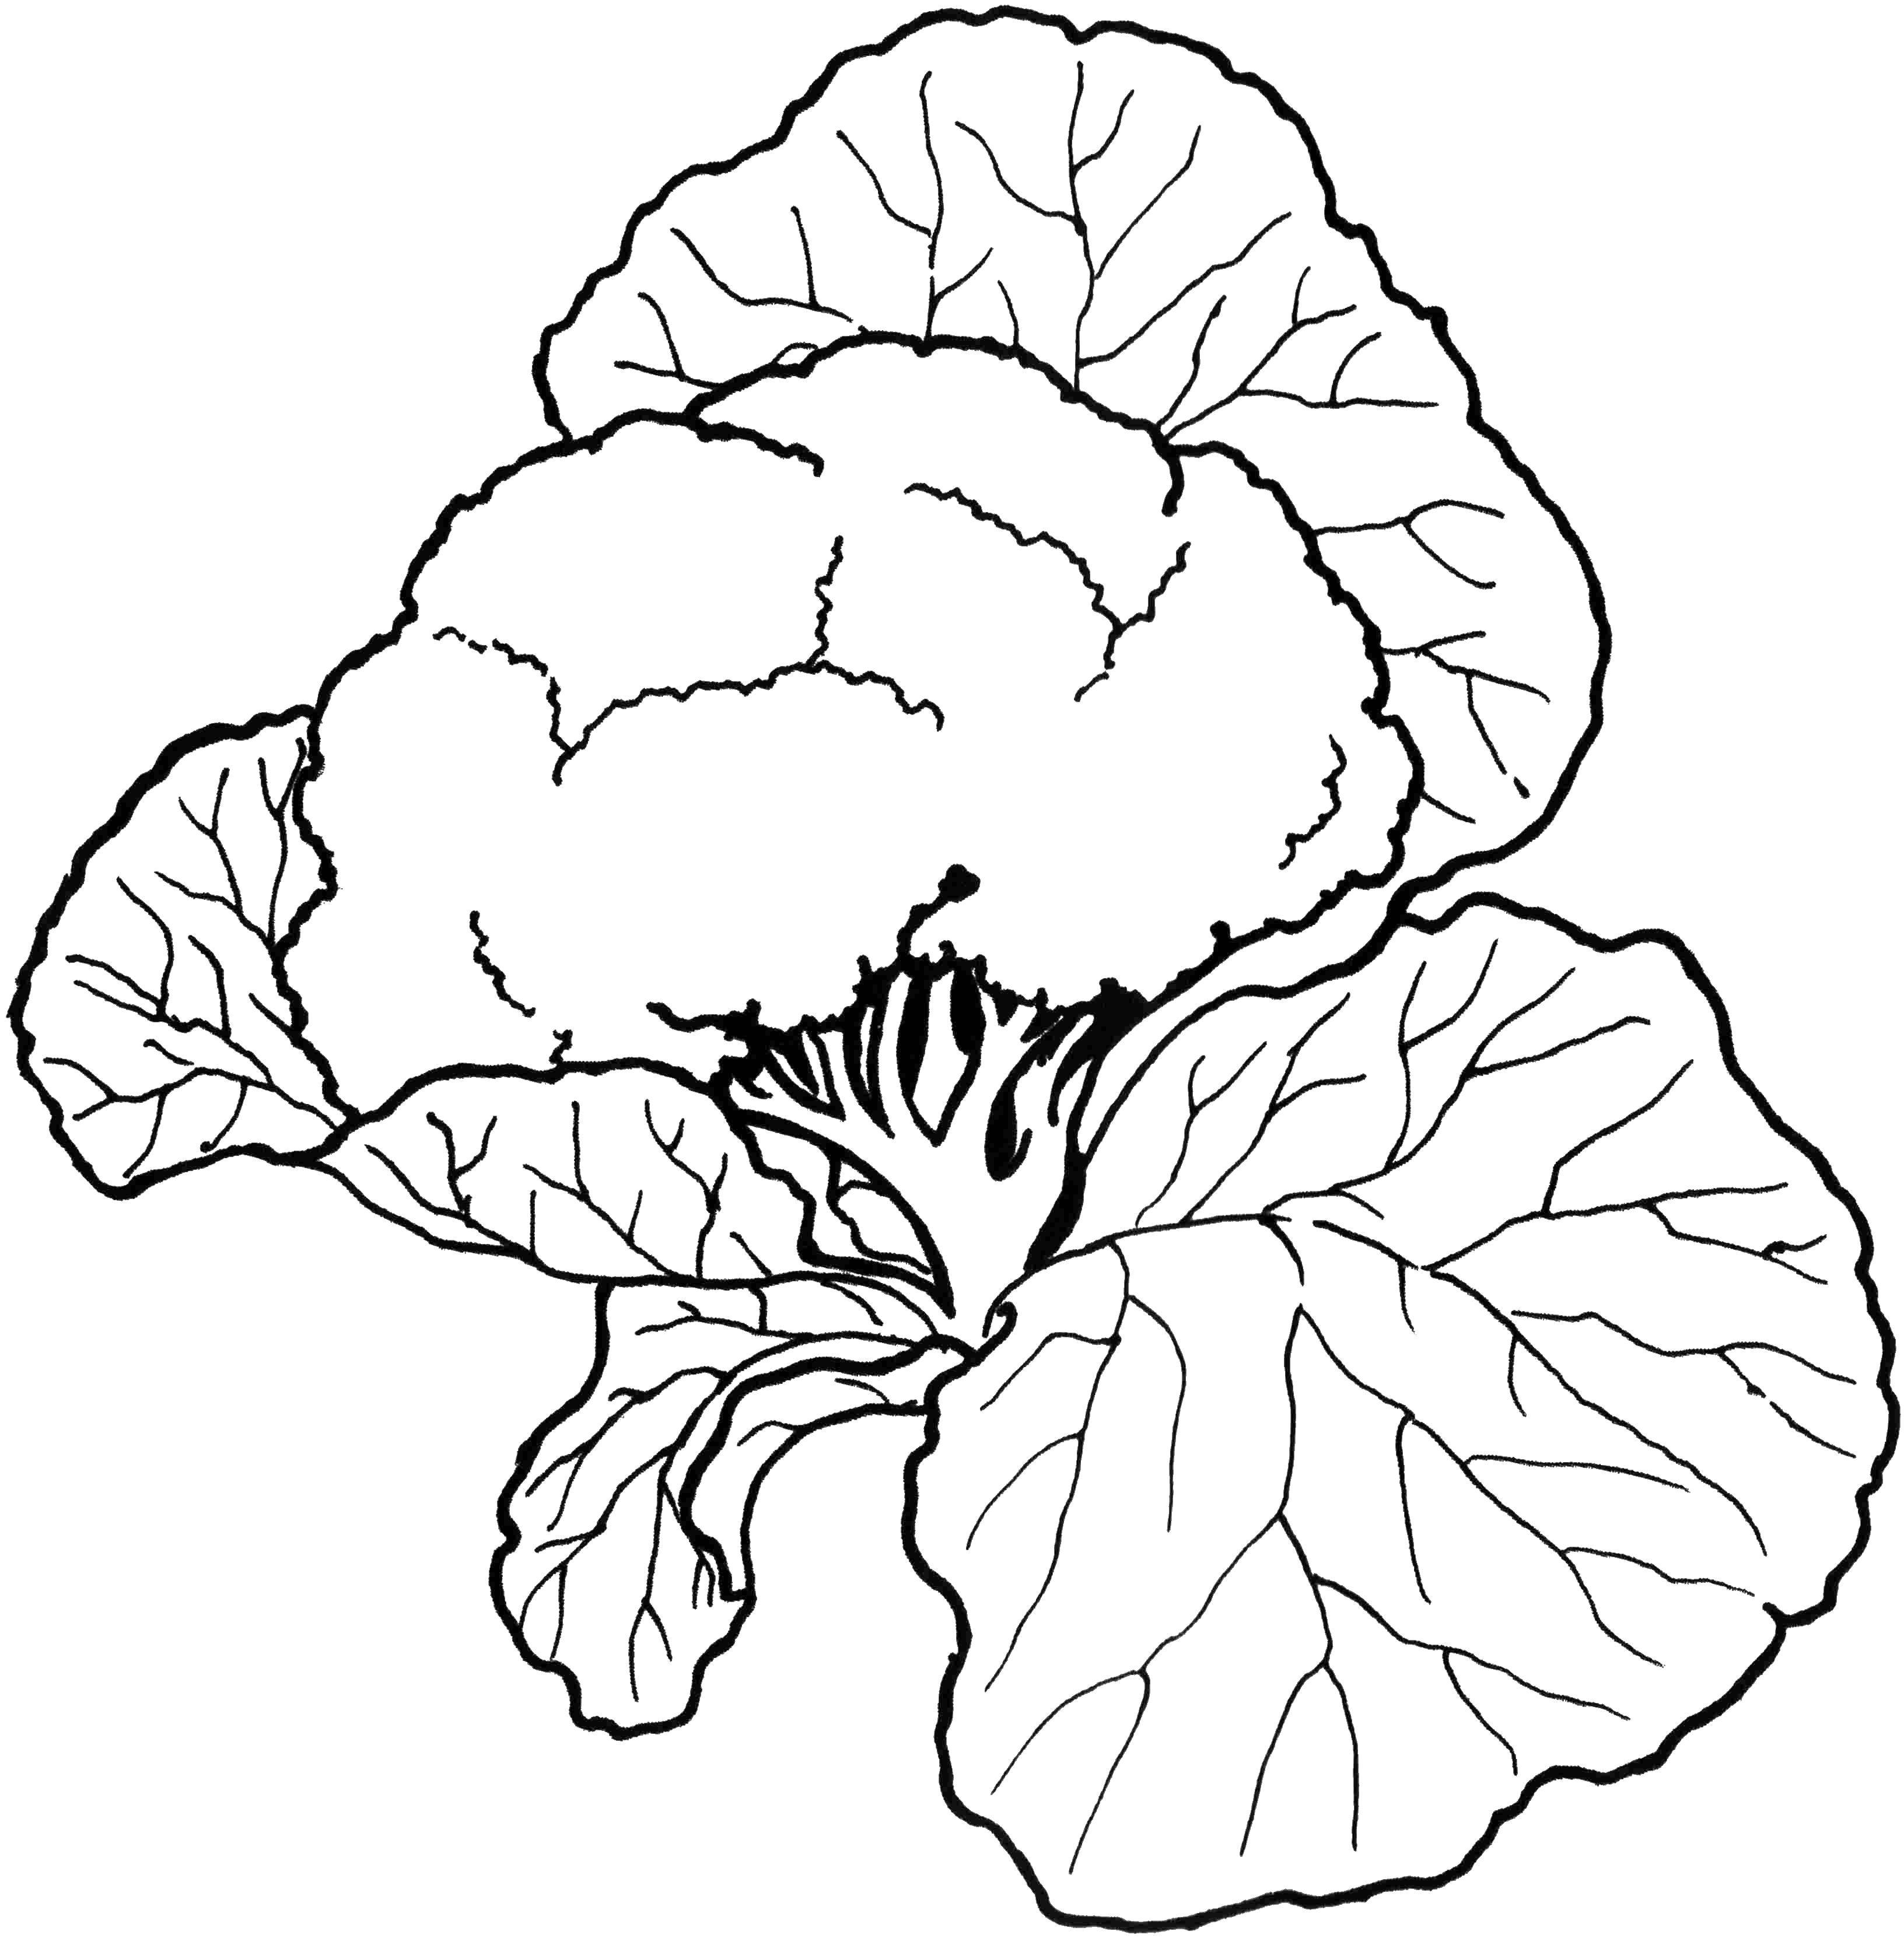 Coloring Cauliflower. Category Vegetables. Tags:  cabbage, cauliflower.